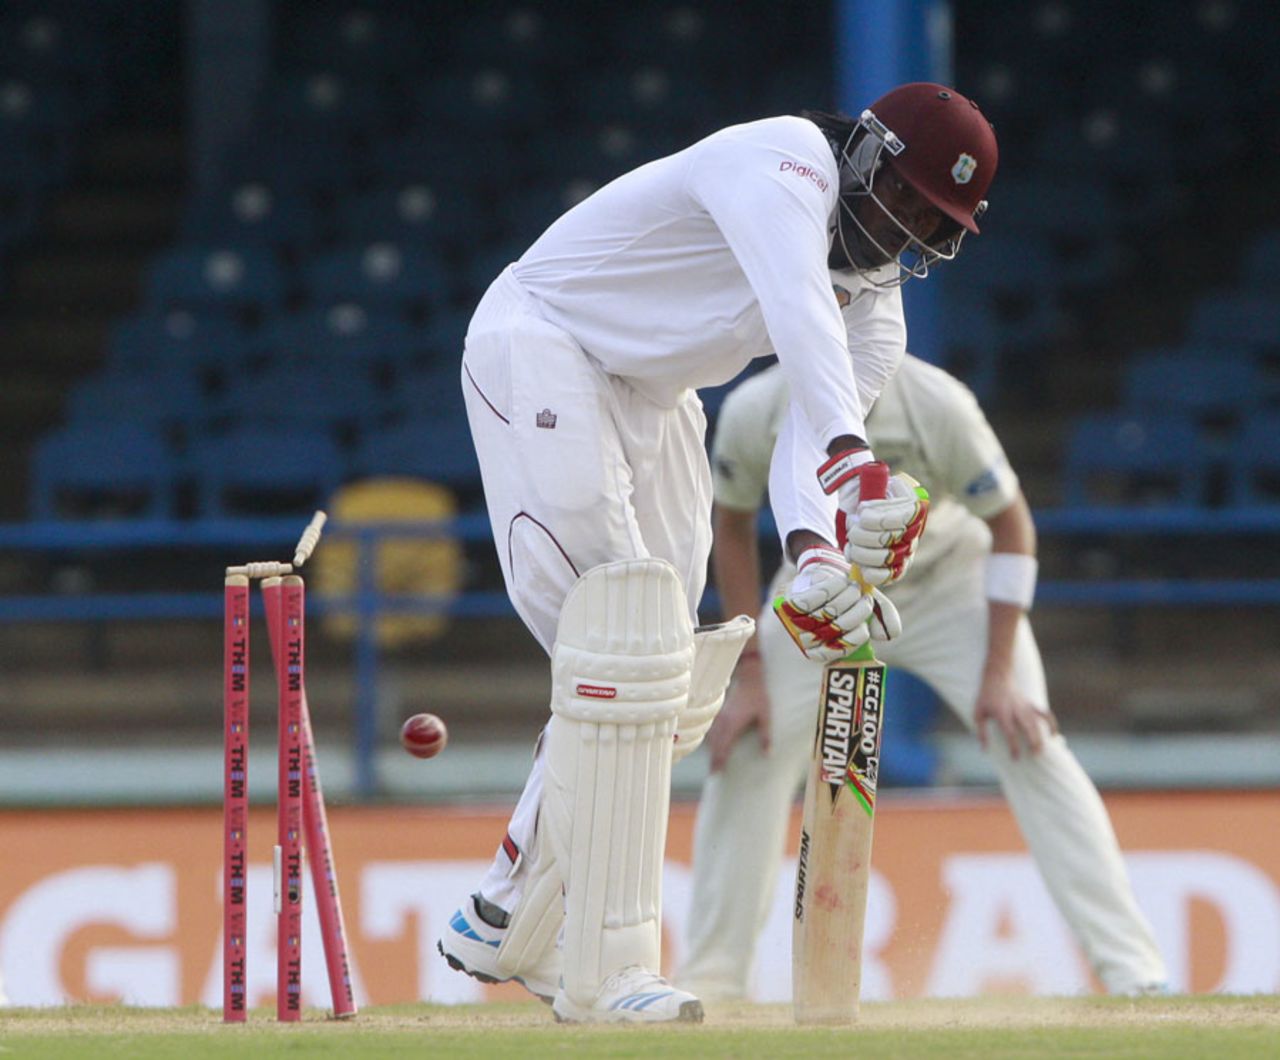 Chris Gayle is bowled, West Indies v New Zealand, 2nd Test, Trinidad, 1st day, June 16, 2014